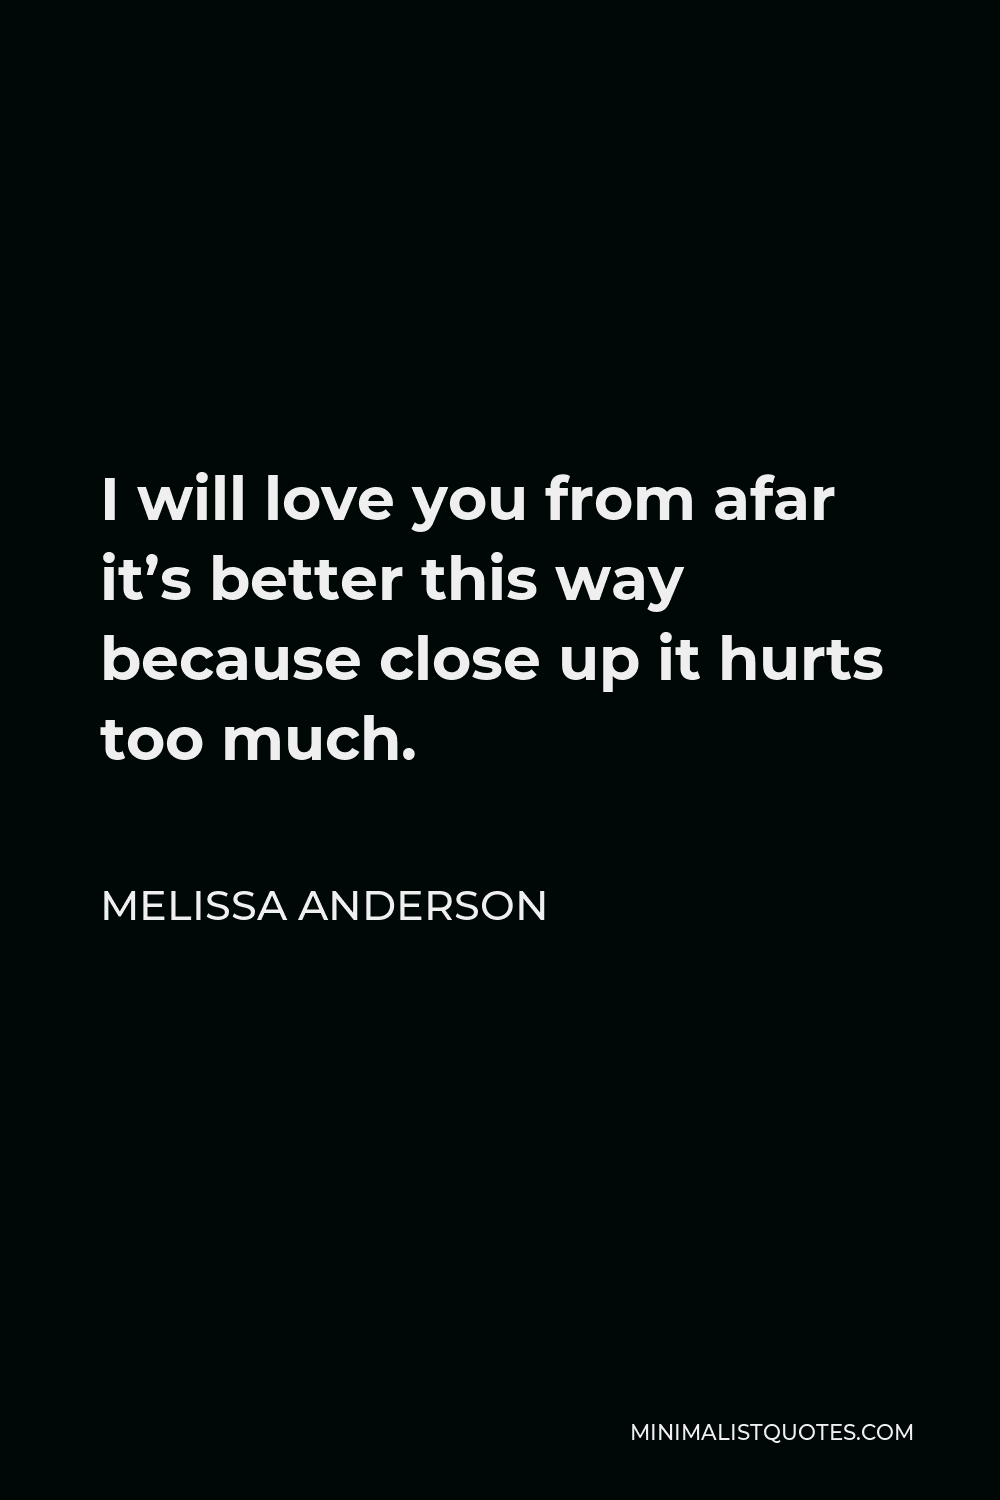 Melissa Anderson Quote - I will love you from afar it’s better this way because close up it hurts too much.